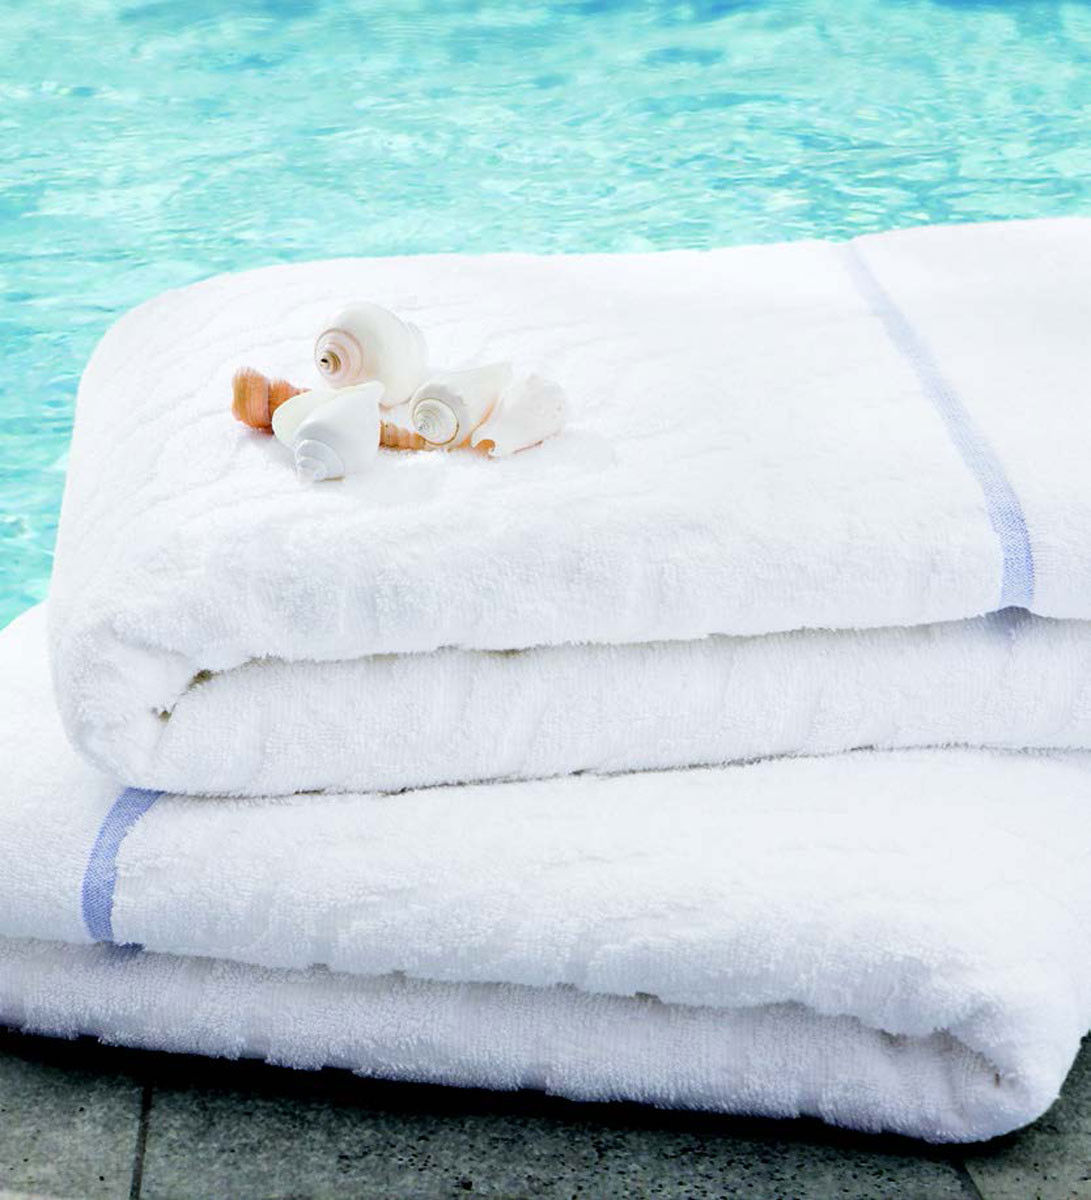 What sets the design of EuroSpa towels apart from others in the pool towel industry?